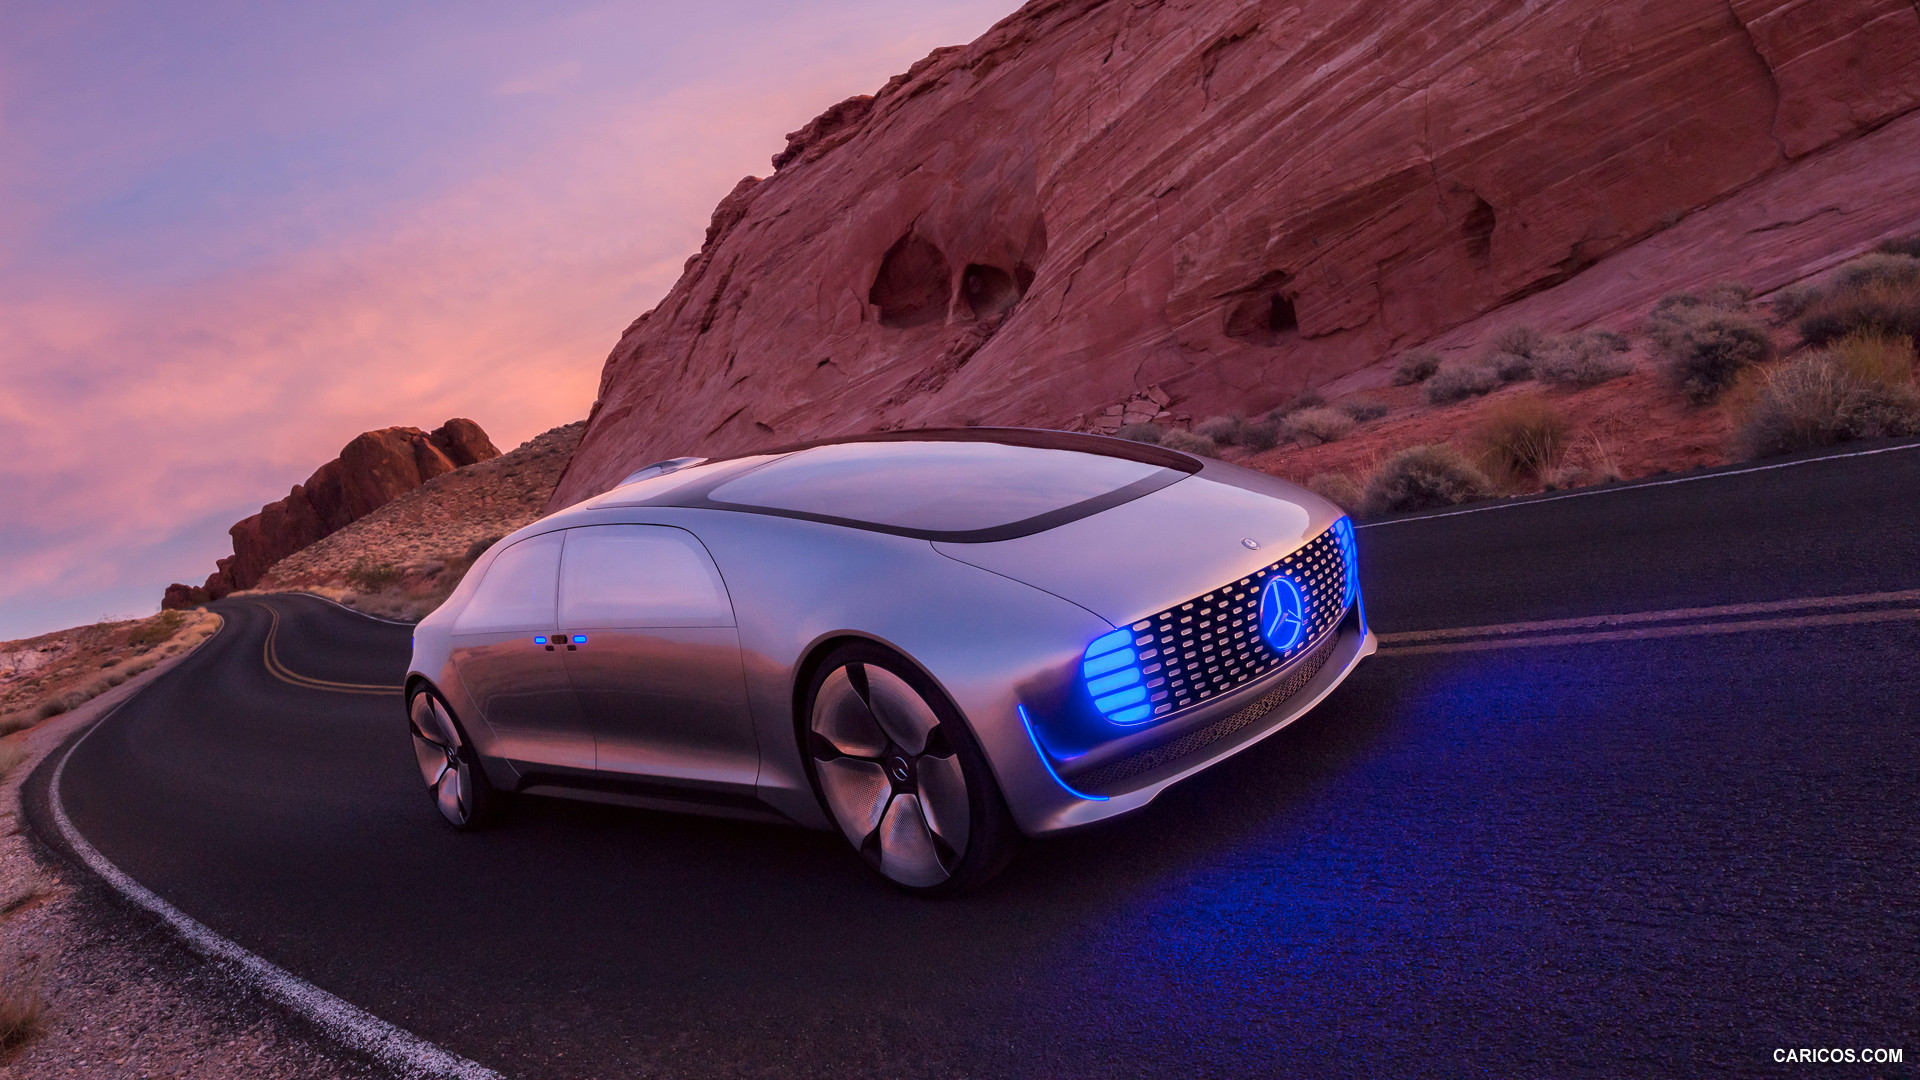 2015 Mercedes-Benz F 015 Luxury in Motion Concept  - Front, #15 of 92